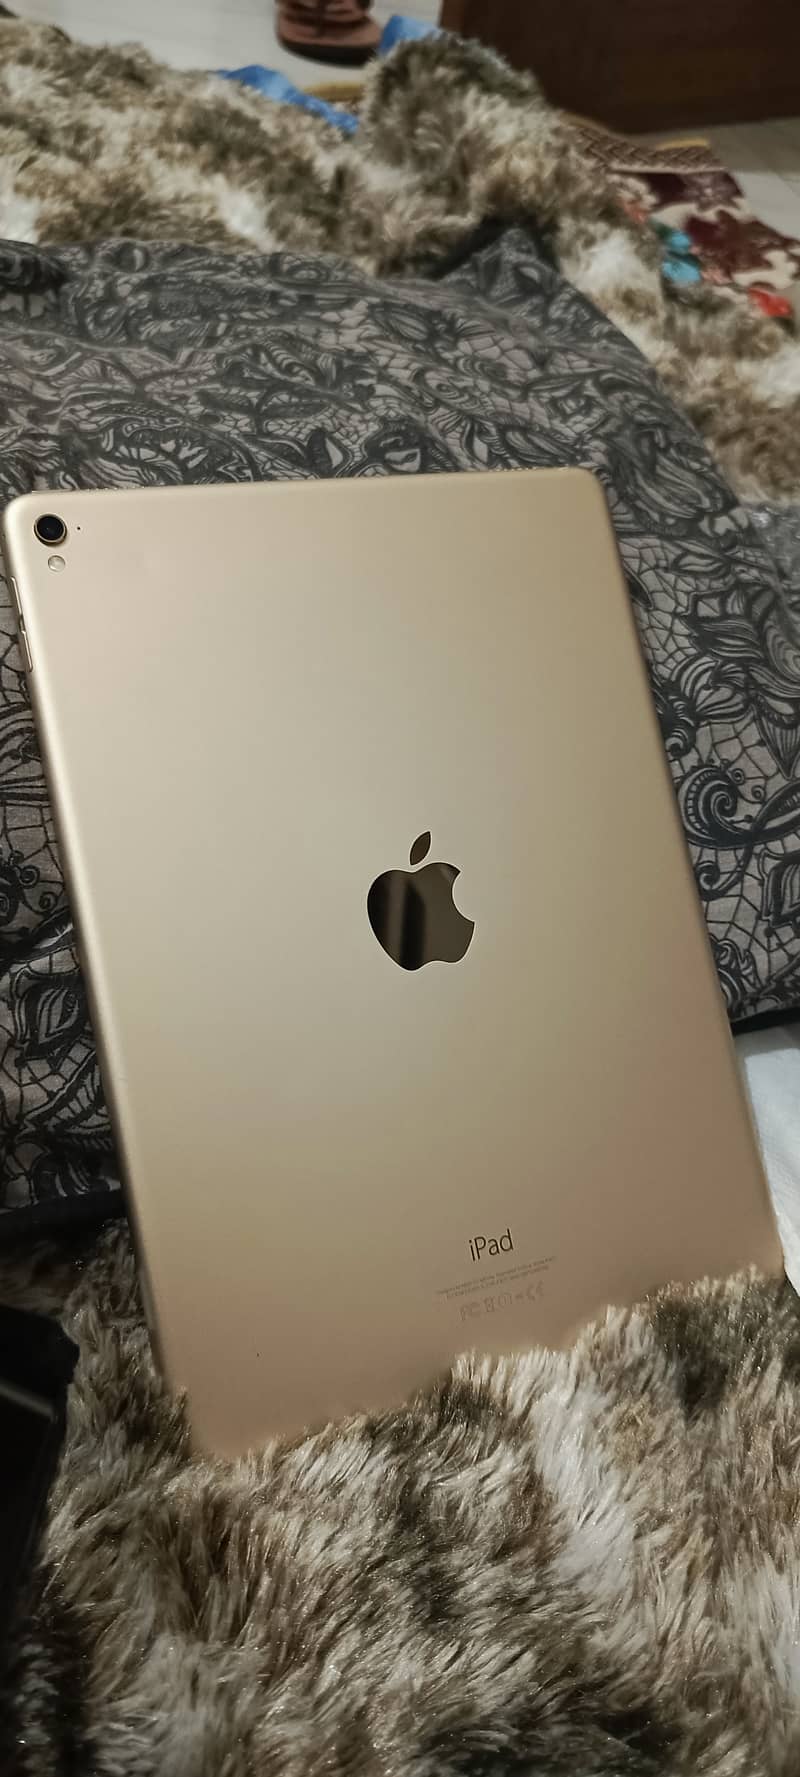 ipad Pro 128 GB gold color water pack lush condition 0